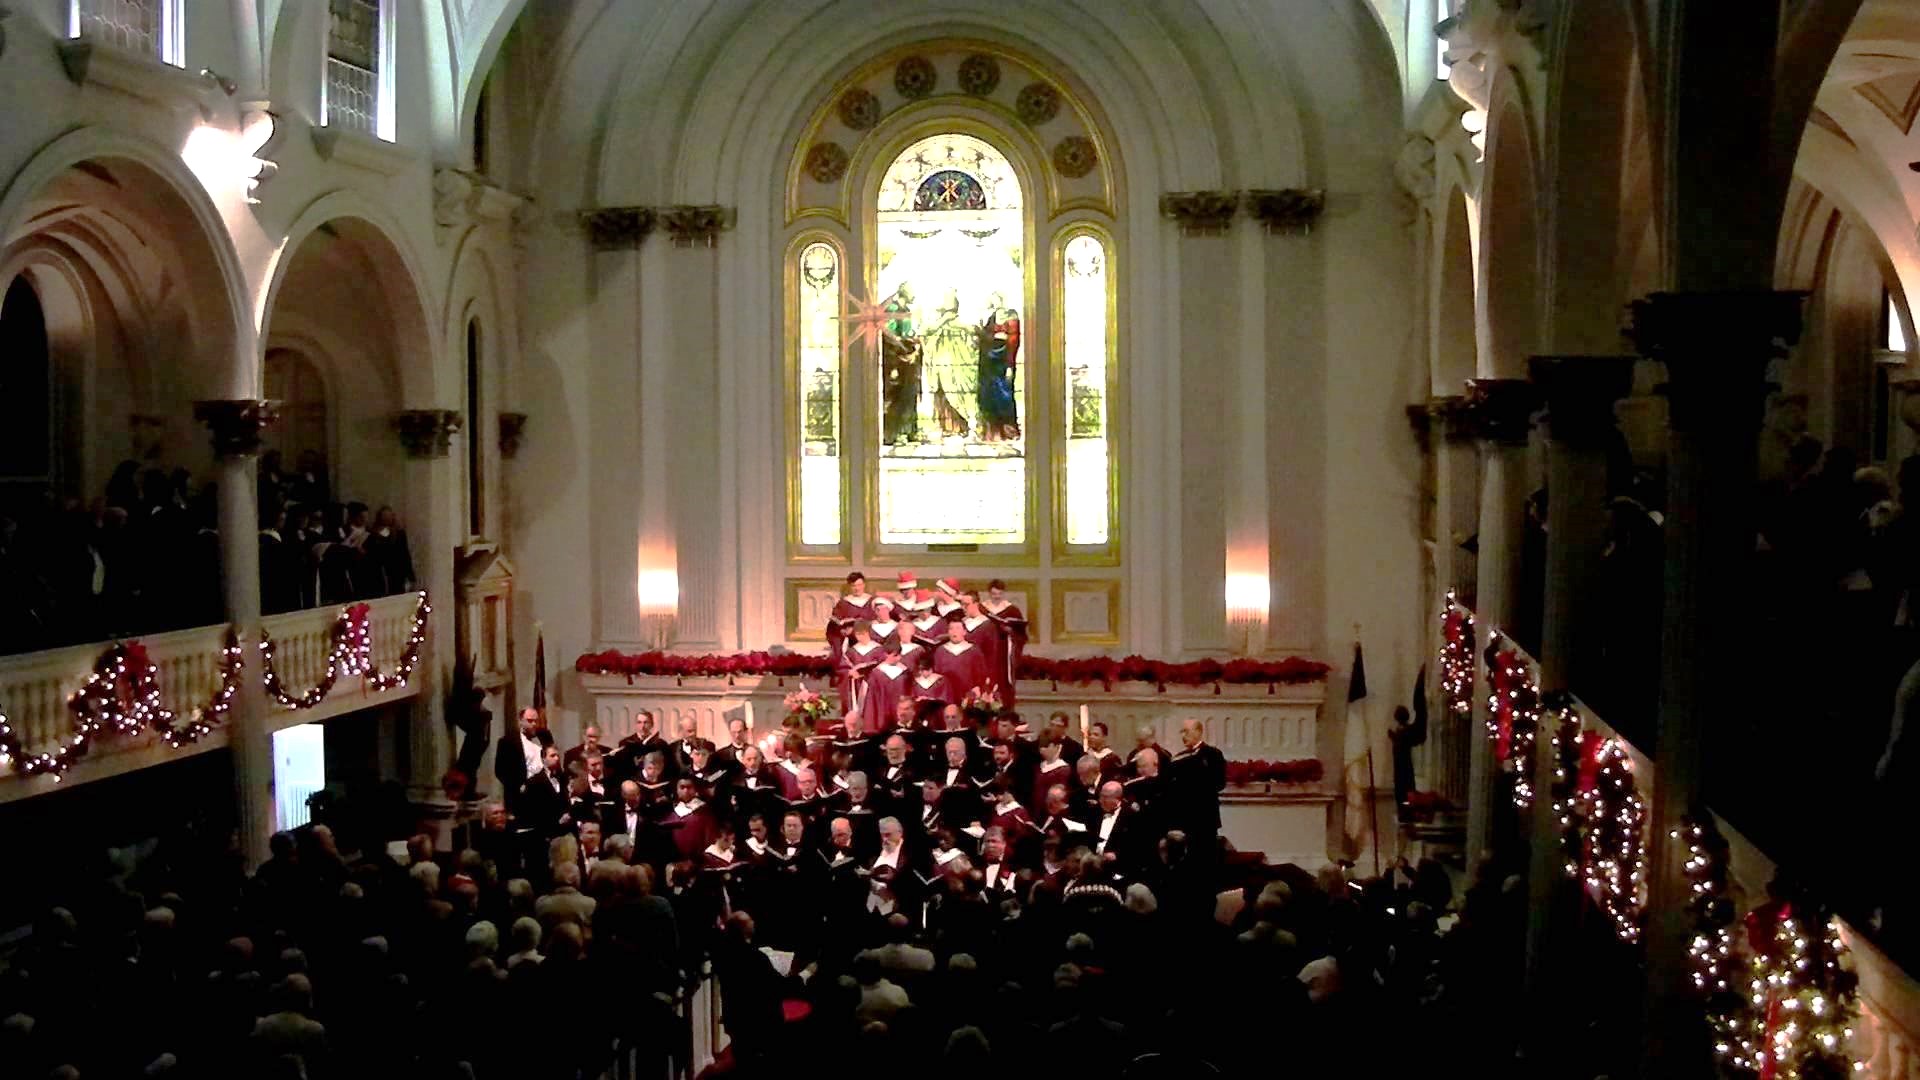 choirs singing at the front of a church decorated for Christmas